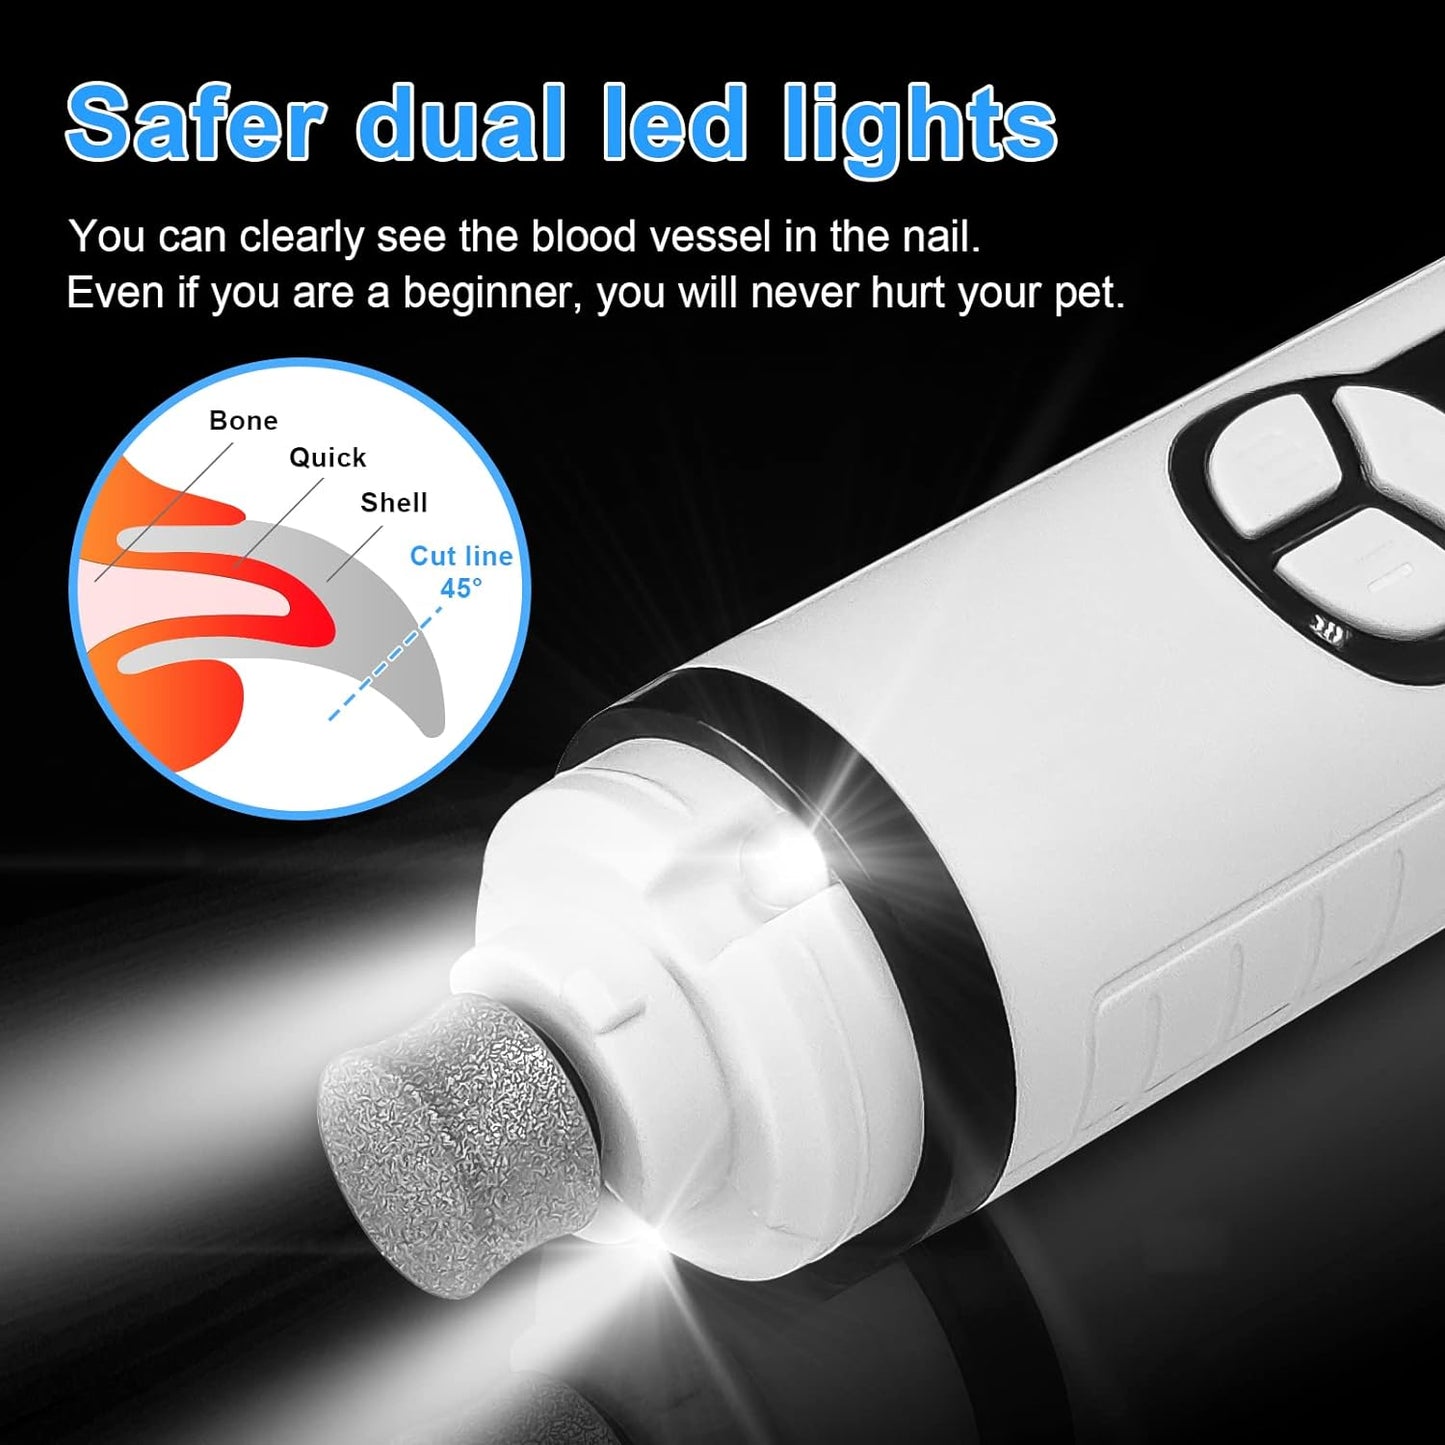 Dog Nail Grinder with LED Lights, 40 Decibels, Super Quiet Noise Claw Scissors for Small, Medium and Large Dogs and Cats, 3 Speeds, USB Connection, Electric Nail Cutter, White